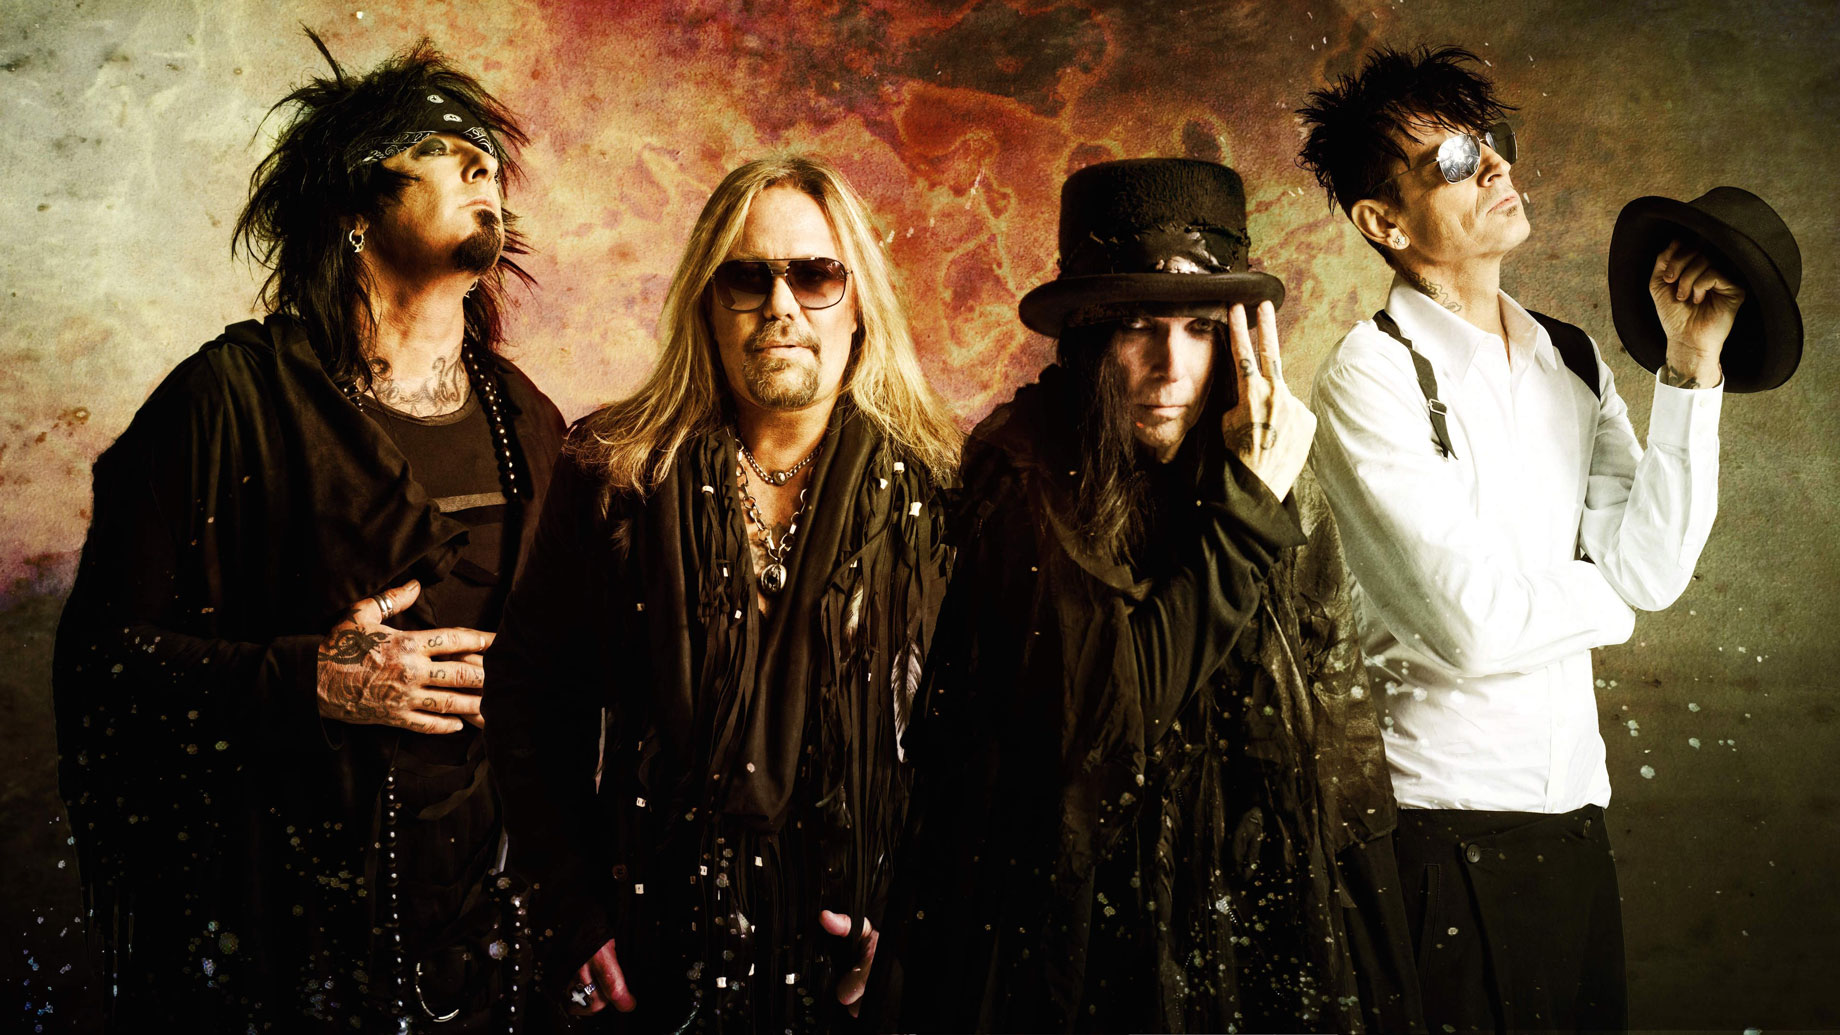 Motley Crue sued by photographers